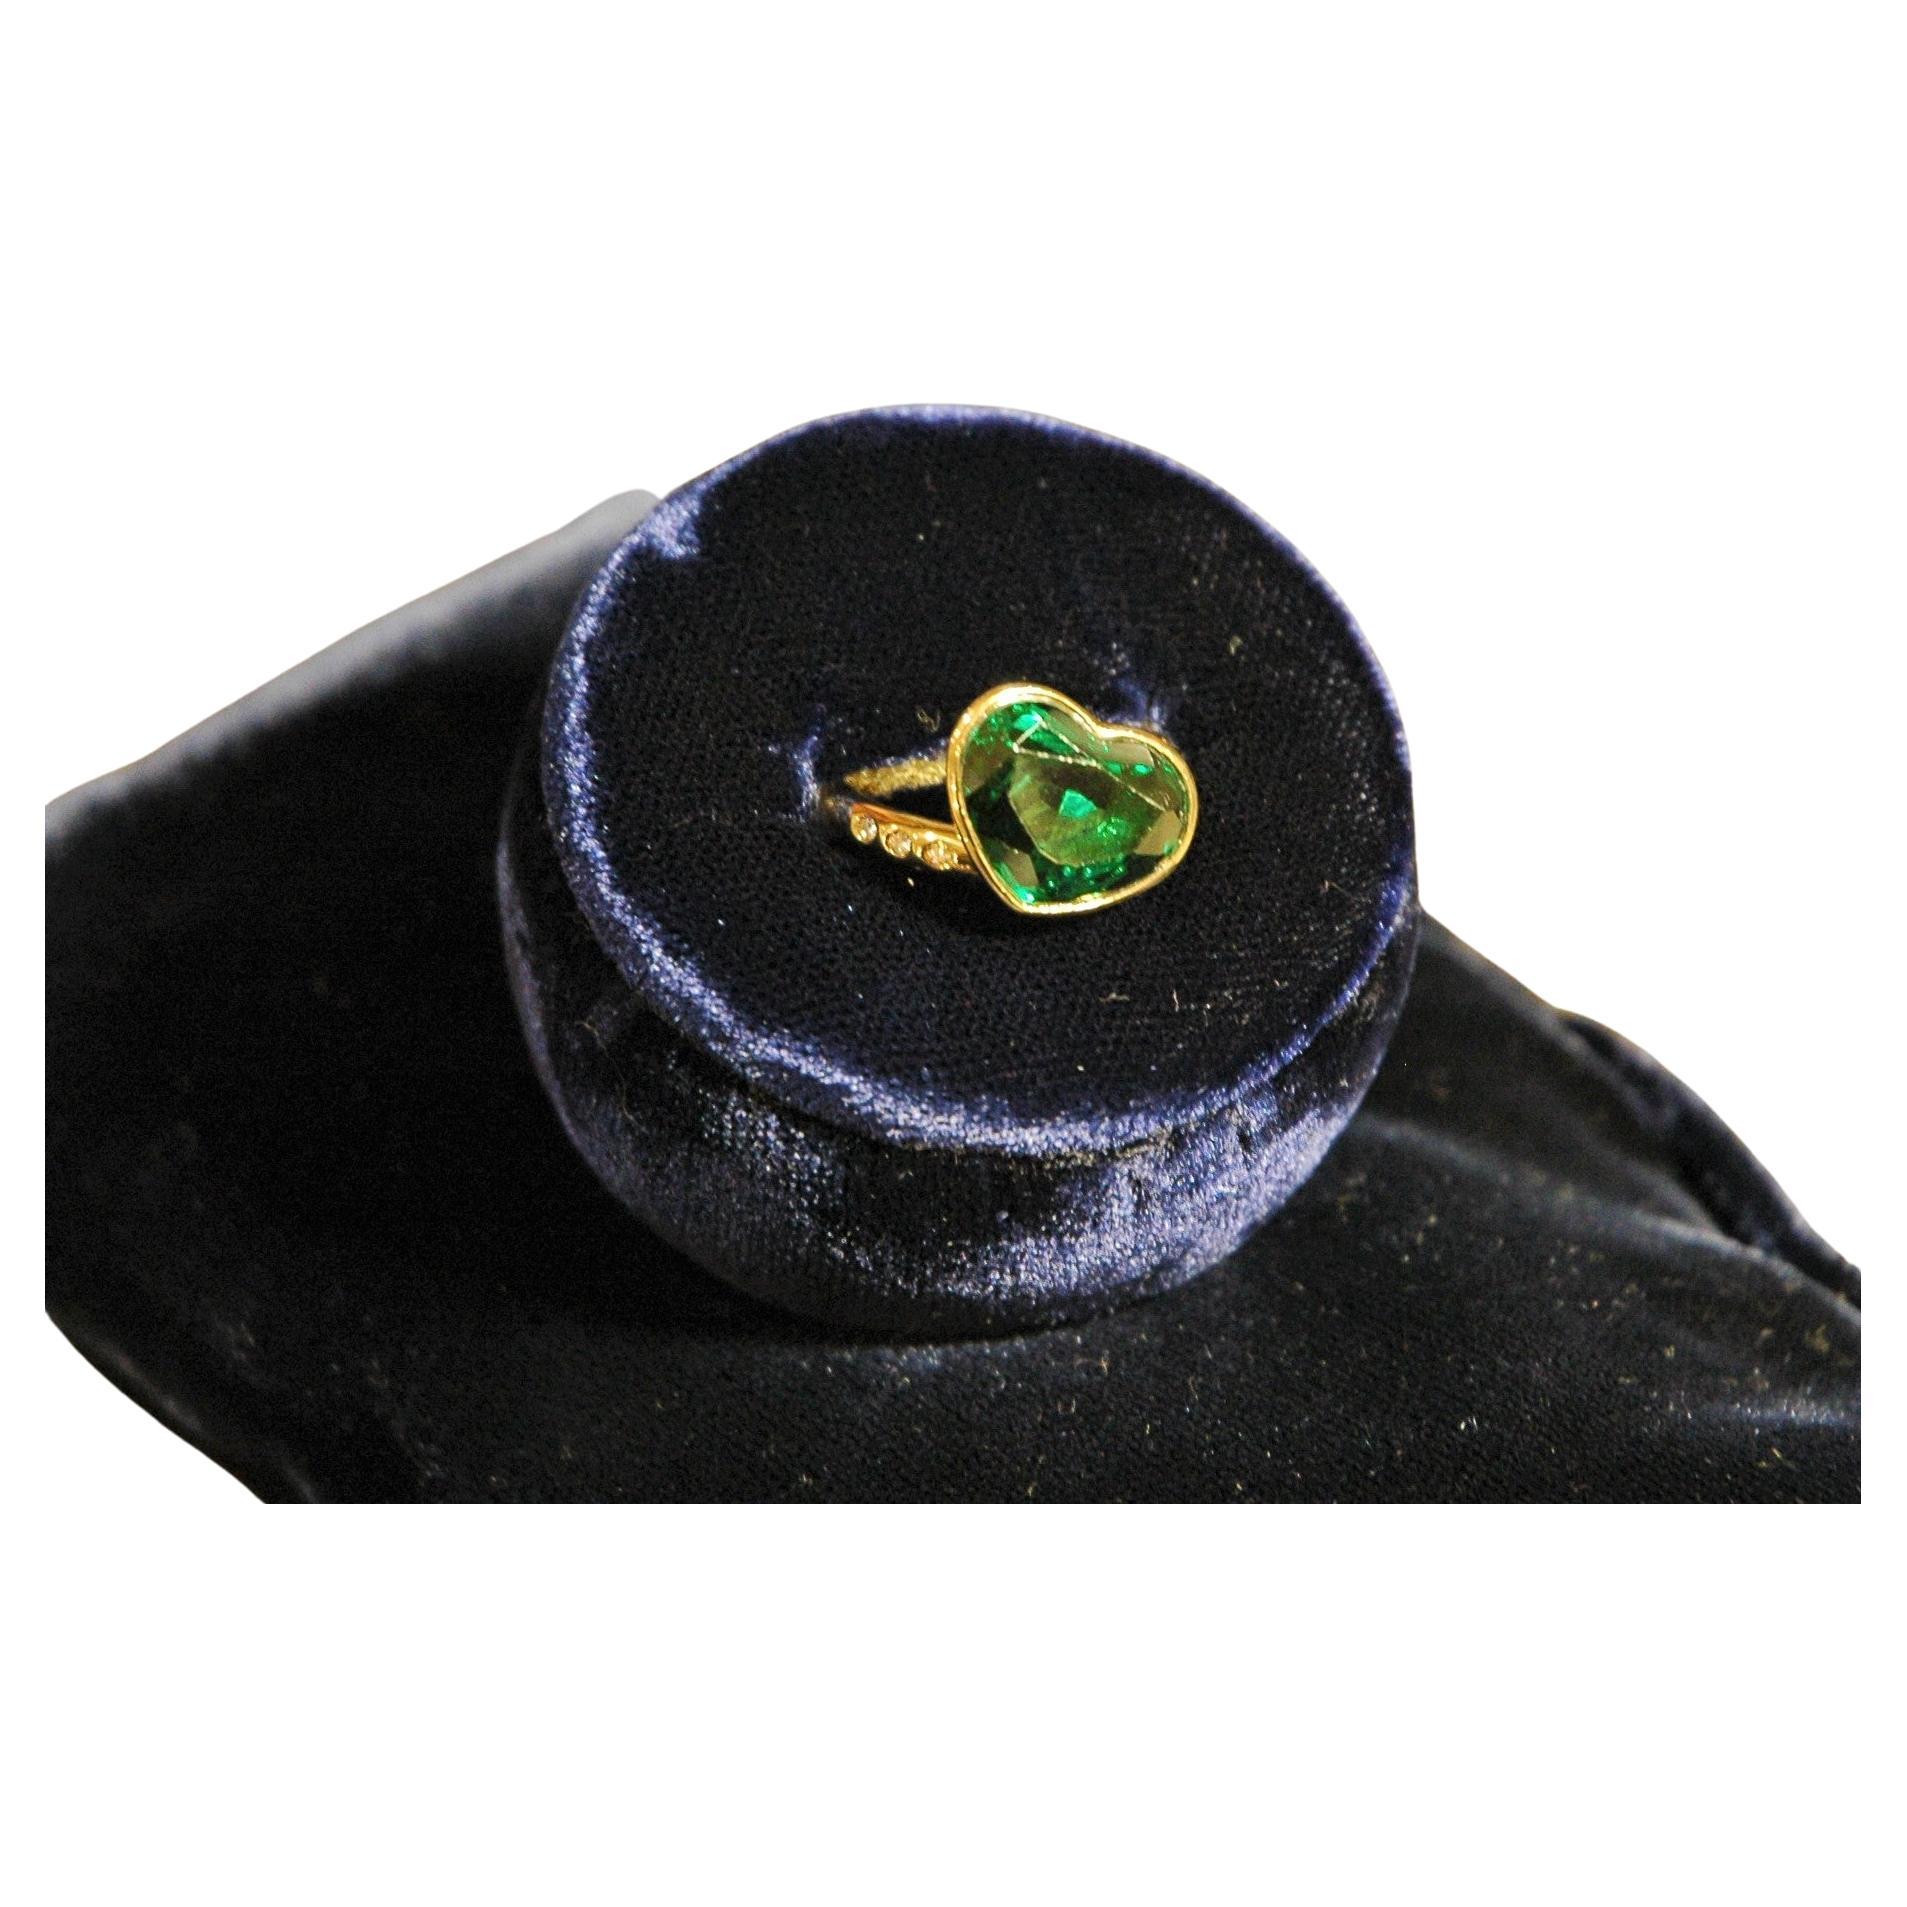 Brilliant Cut 18 Kt Yellow Gold Ring with Diamonds and a Green Tourmaline Heart For Sale